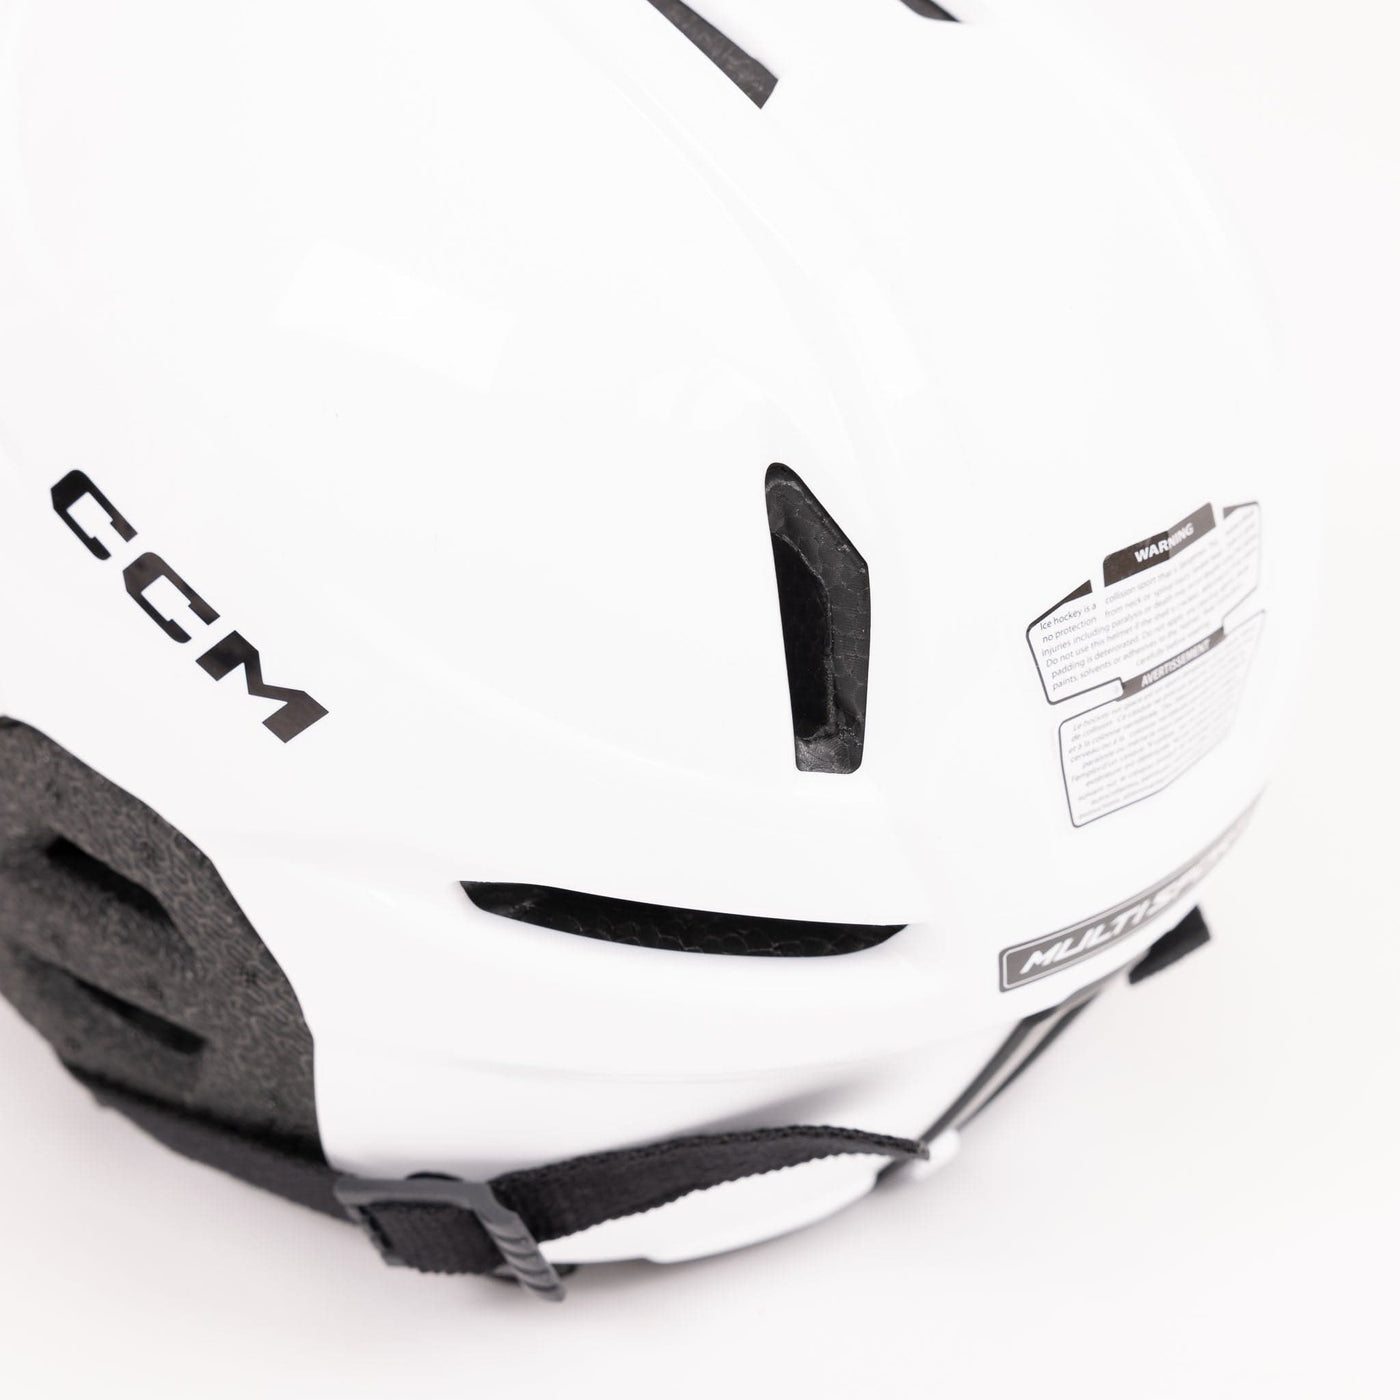 CCM MultiSport Helmet / Cage Combo - The Hockey Shop Source For Sports